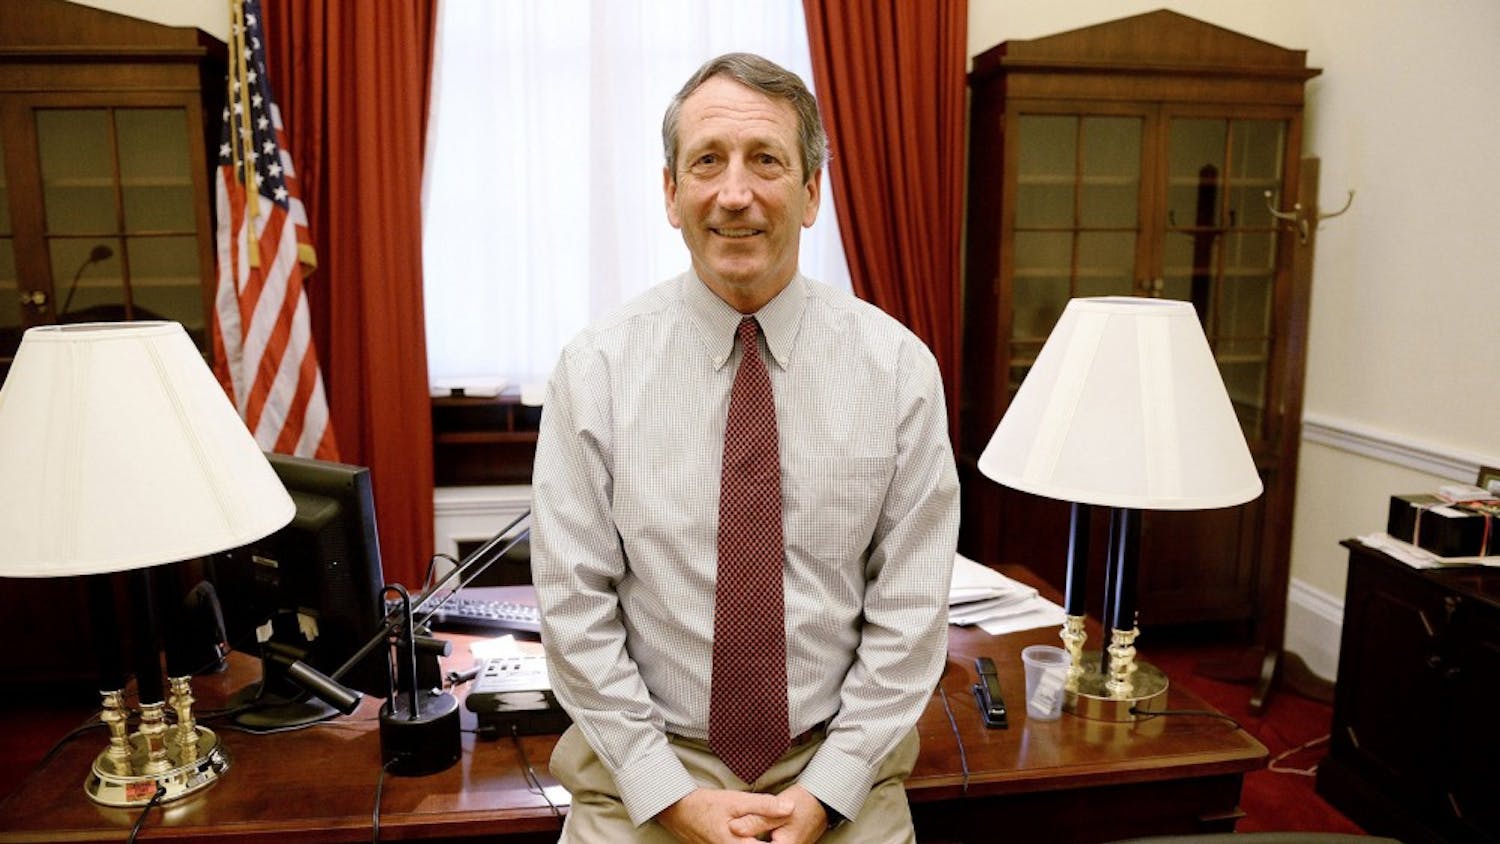 Rep. Mark Sanford (R-S.C.) in his office on Capitol Hill in Washington, D.C., on February 4, 2014. Sanford gave out pocket-sized Constitutions to trick-or-treaters. (Olivier Douliery/Abaca Press/TNS)